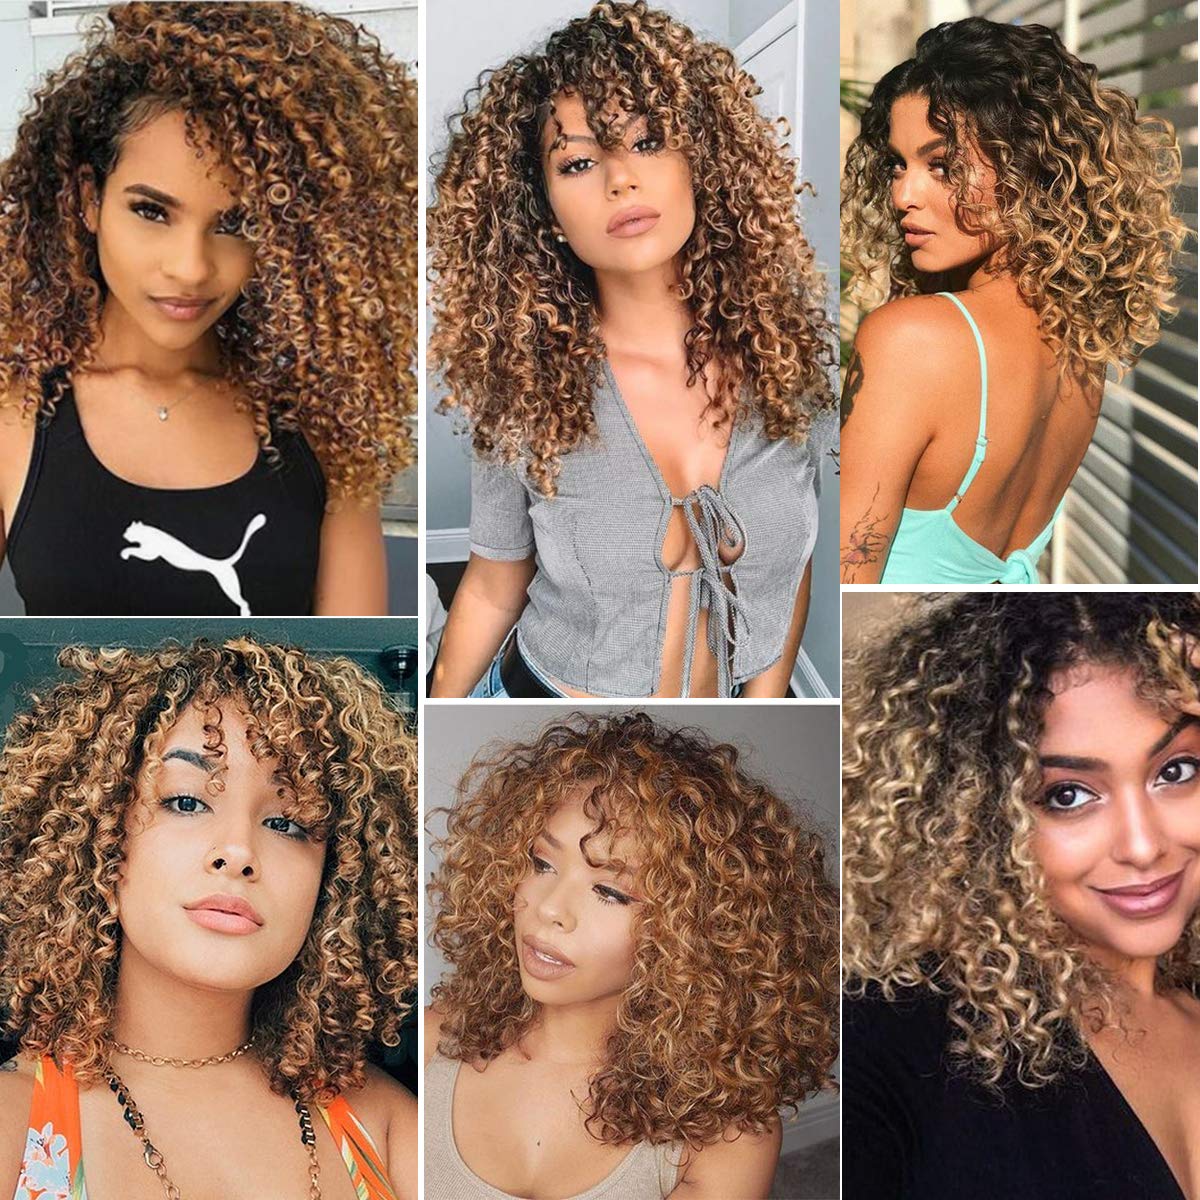 Gluna Hair Short Curly Bob Non Lace Front Machine Made Wig 1B/30 Ombre Colored Brown Wig with Dark Roots for Black Women